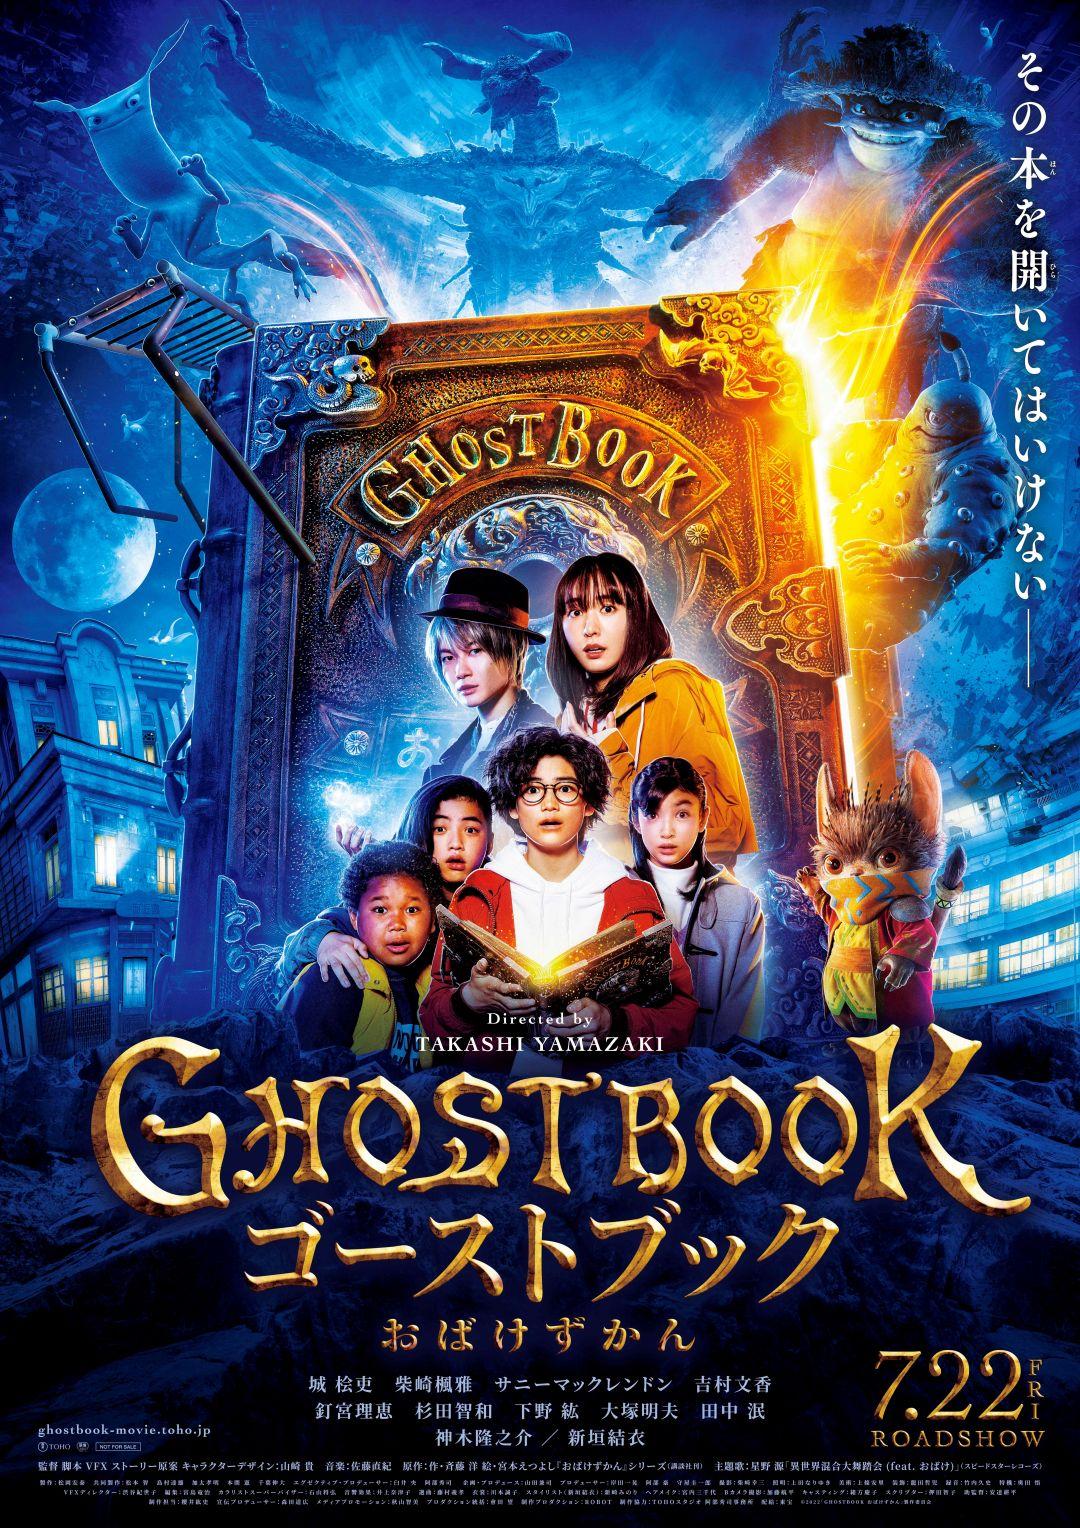 GHOST BOOK 妖怪圖鑑Ghostbook